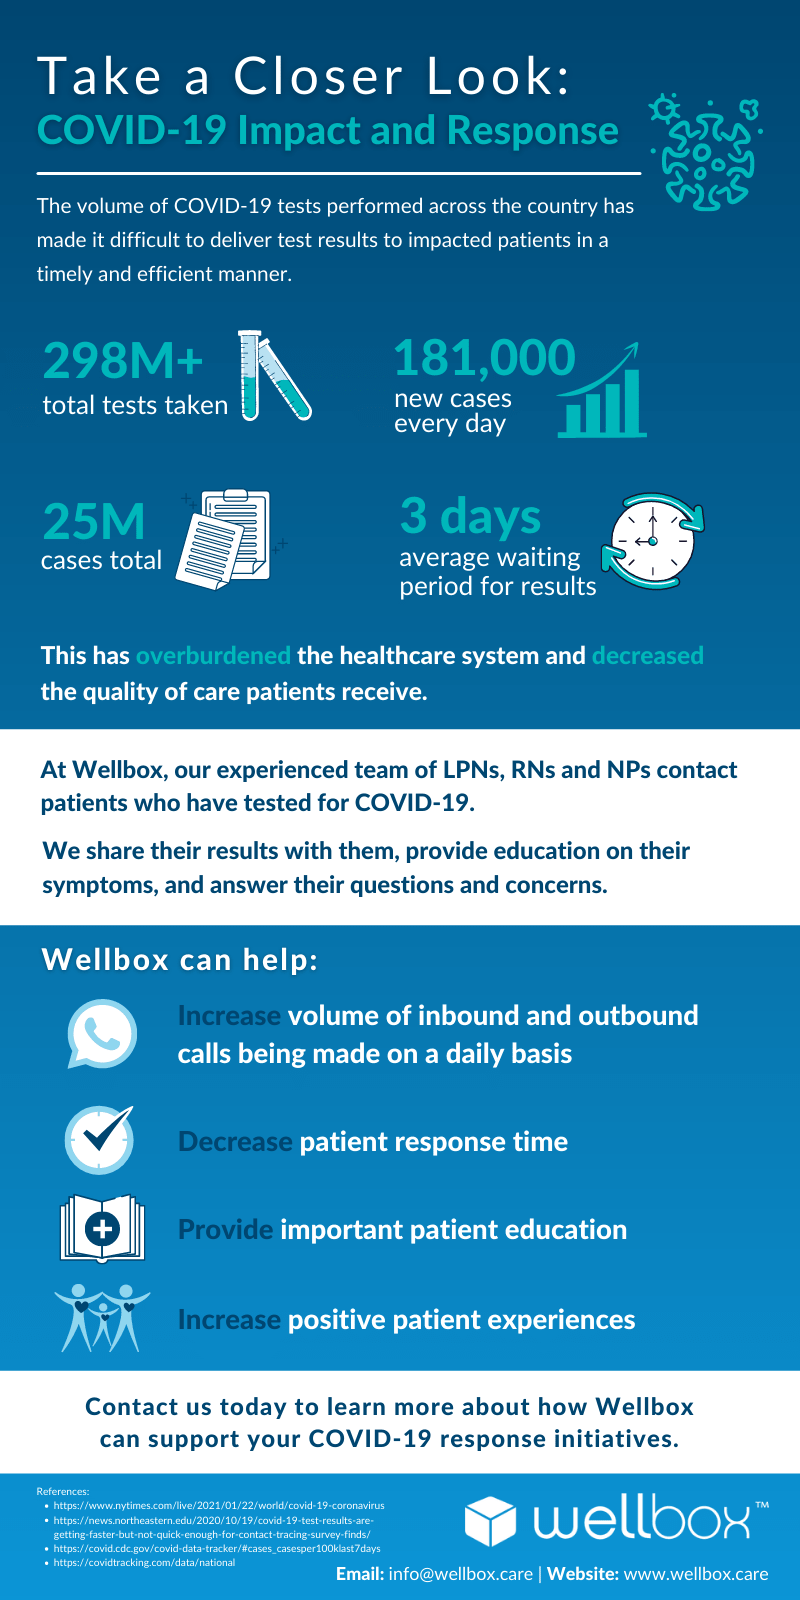 This infographic outlines the benefits of partnering with Wellbox to assist you in your COVID-19 response initiatives.